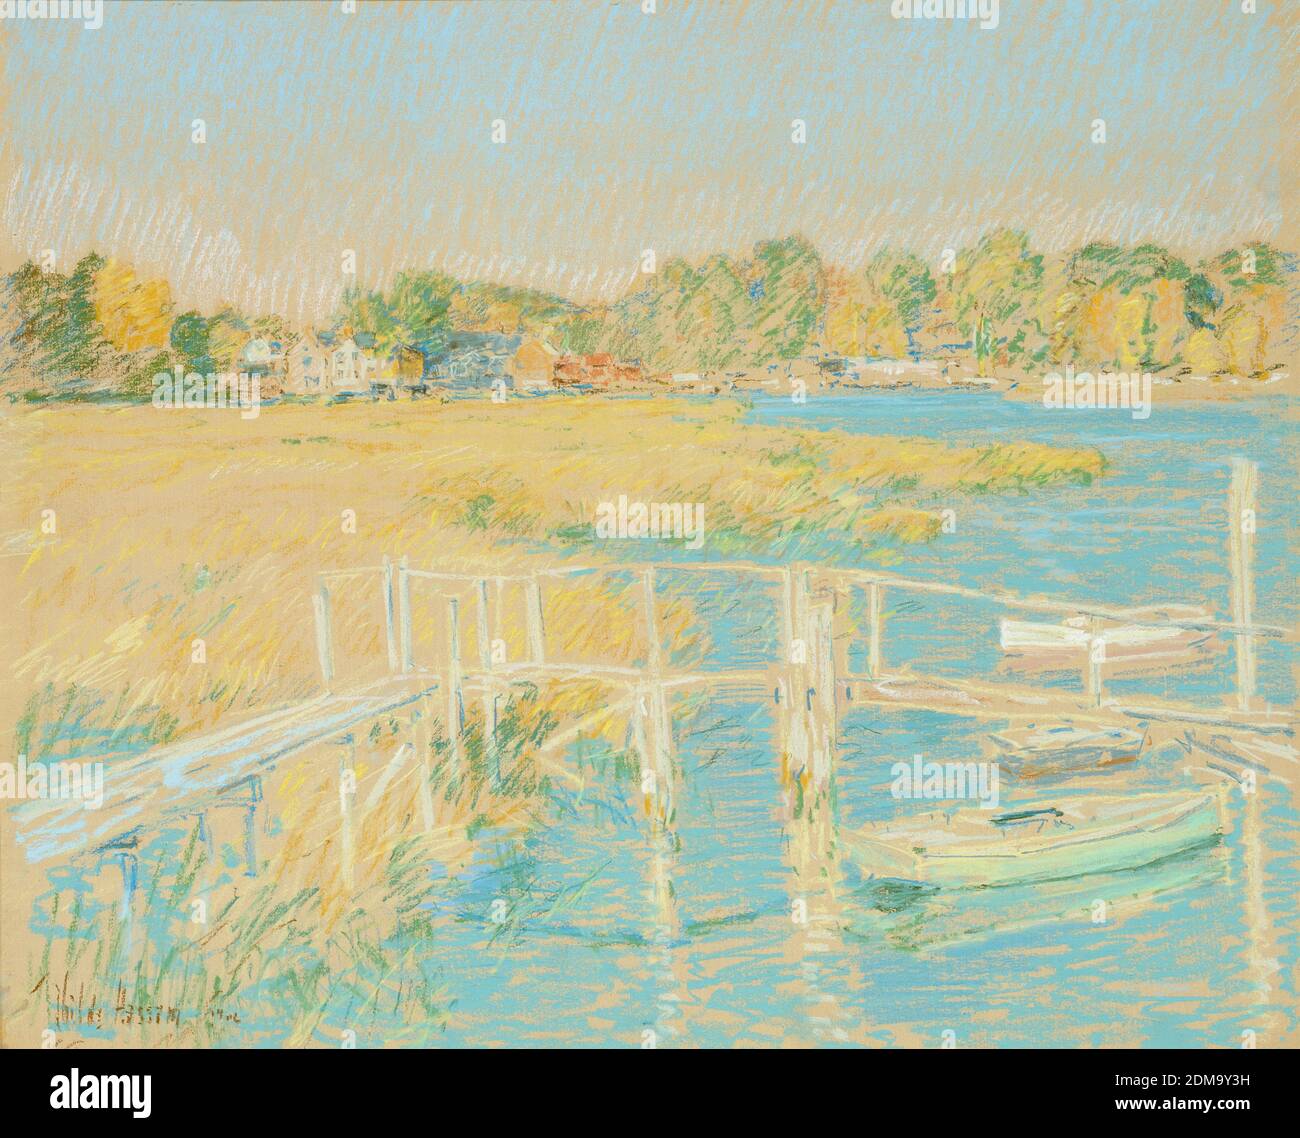 Up the River, Late Afternoon, October. 1906 American Impressionist Painting by Childe Hassam - Very high resolution and quality image Stock Photo